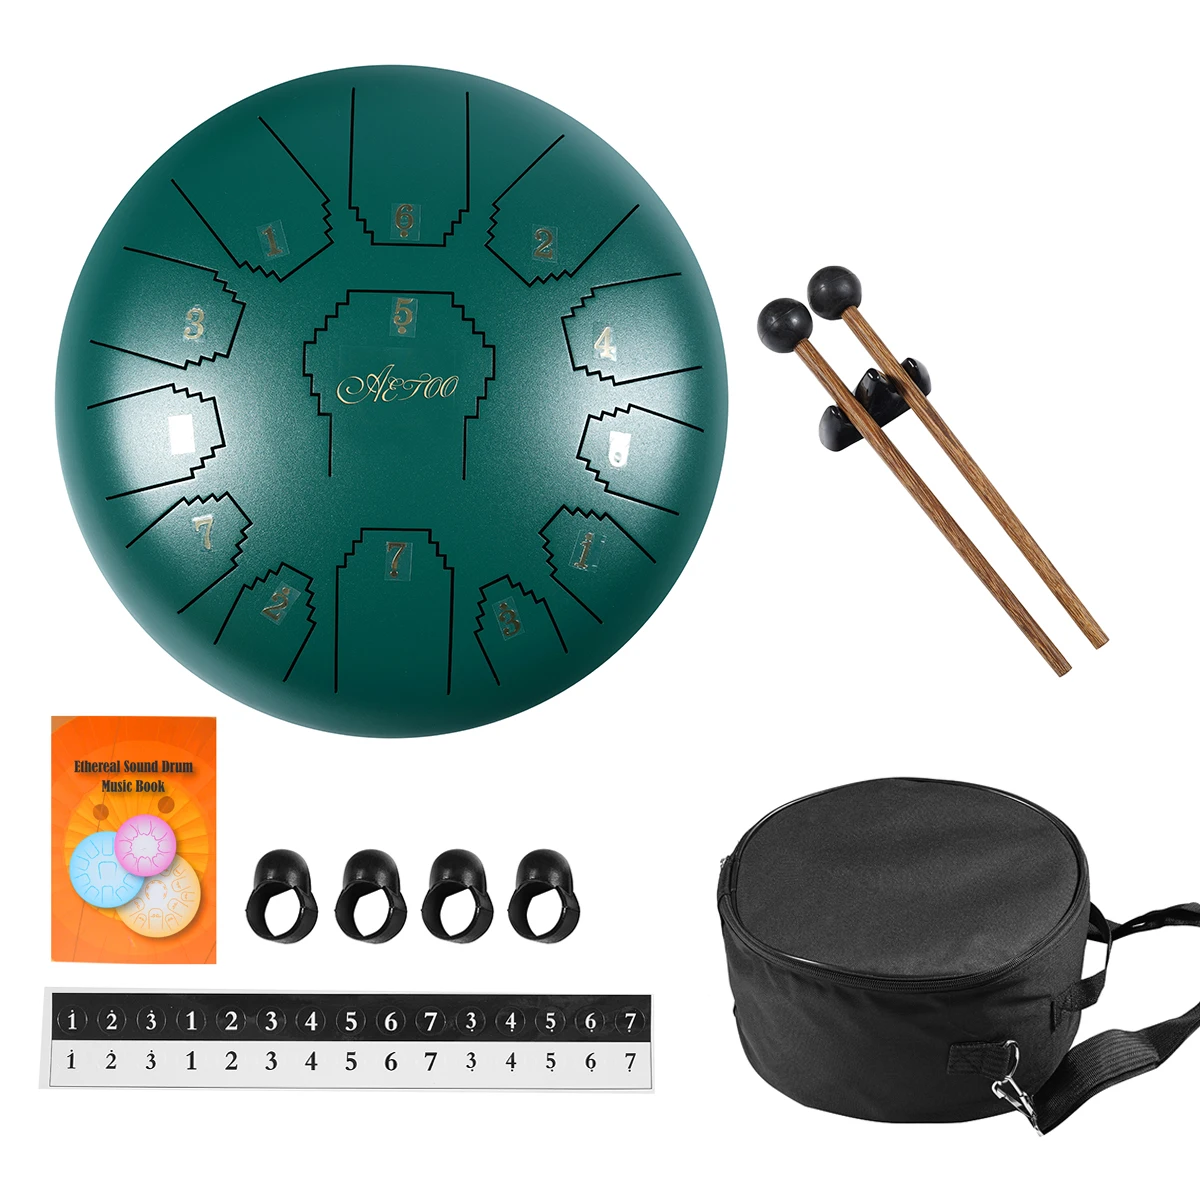 

10 Inches Steel Tongue Drum 11 Tones ethereal drum with 1Pair Mallets + Storage Drum Bag Note Sticks